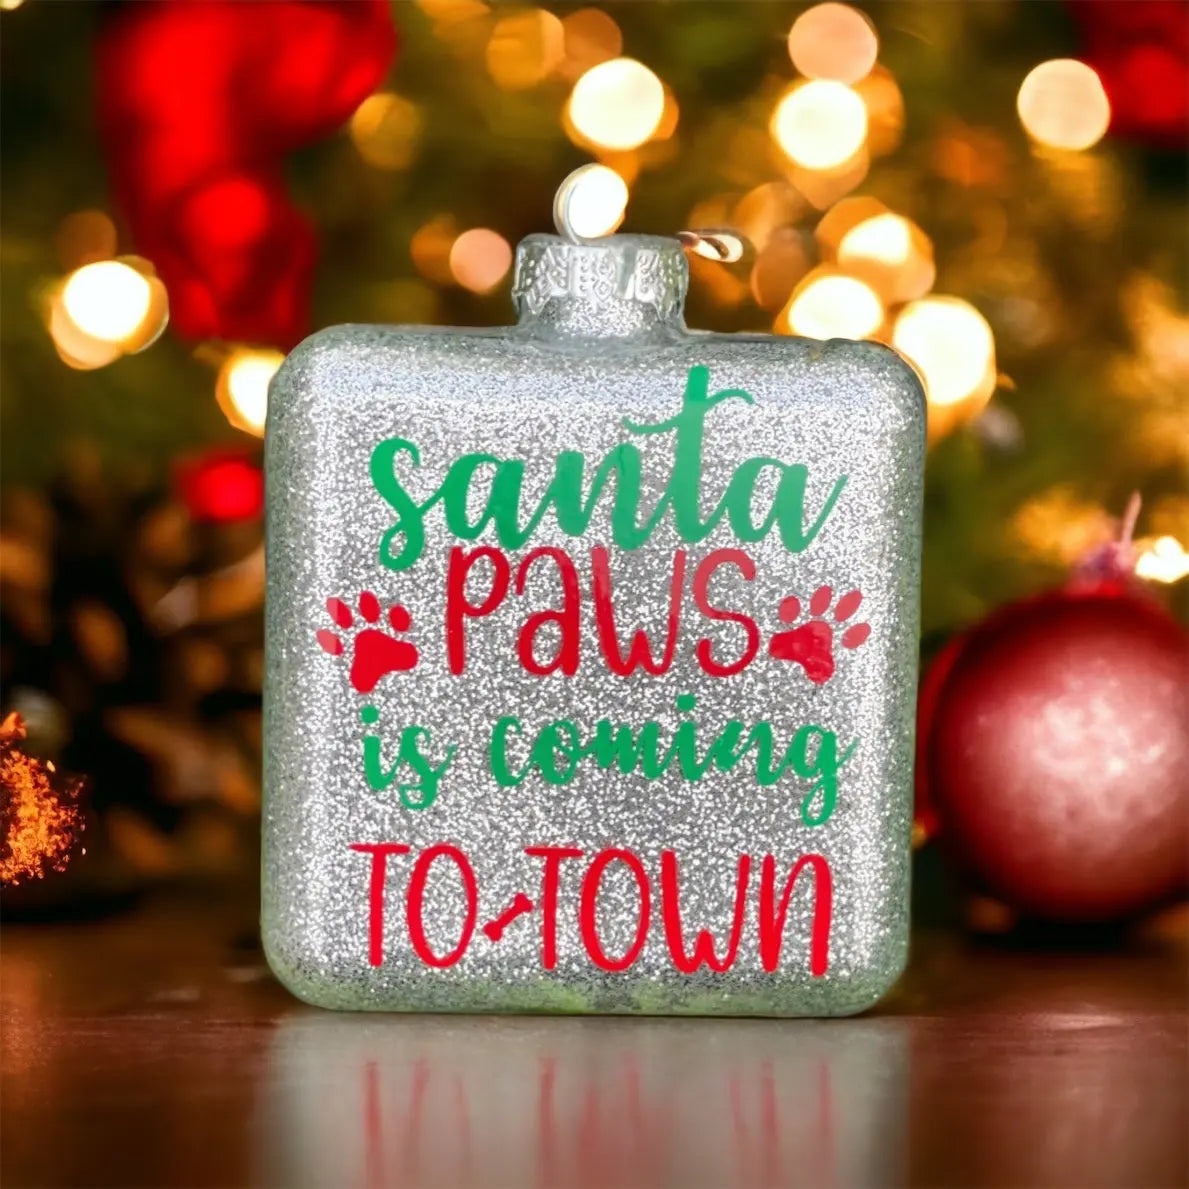 "Santa Paws Is Coming To Town", Glass Square Ornament - Sew chipper 